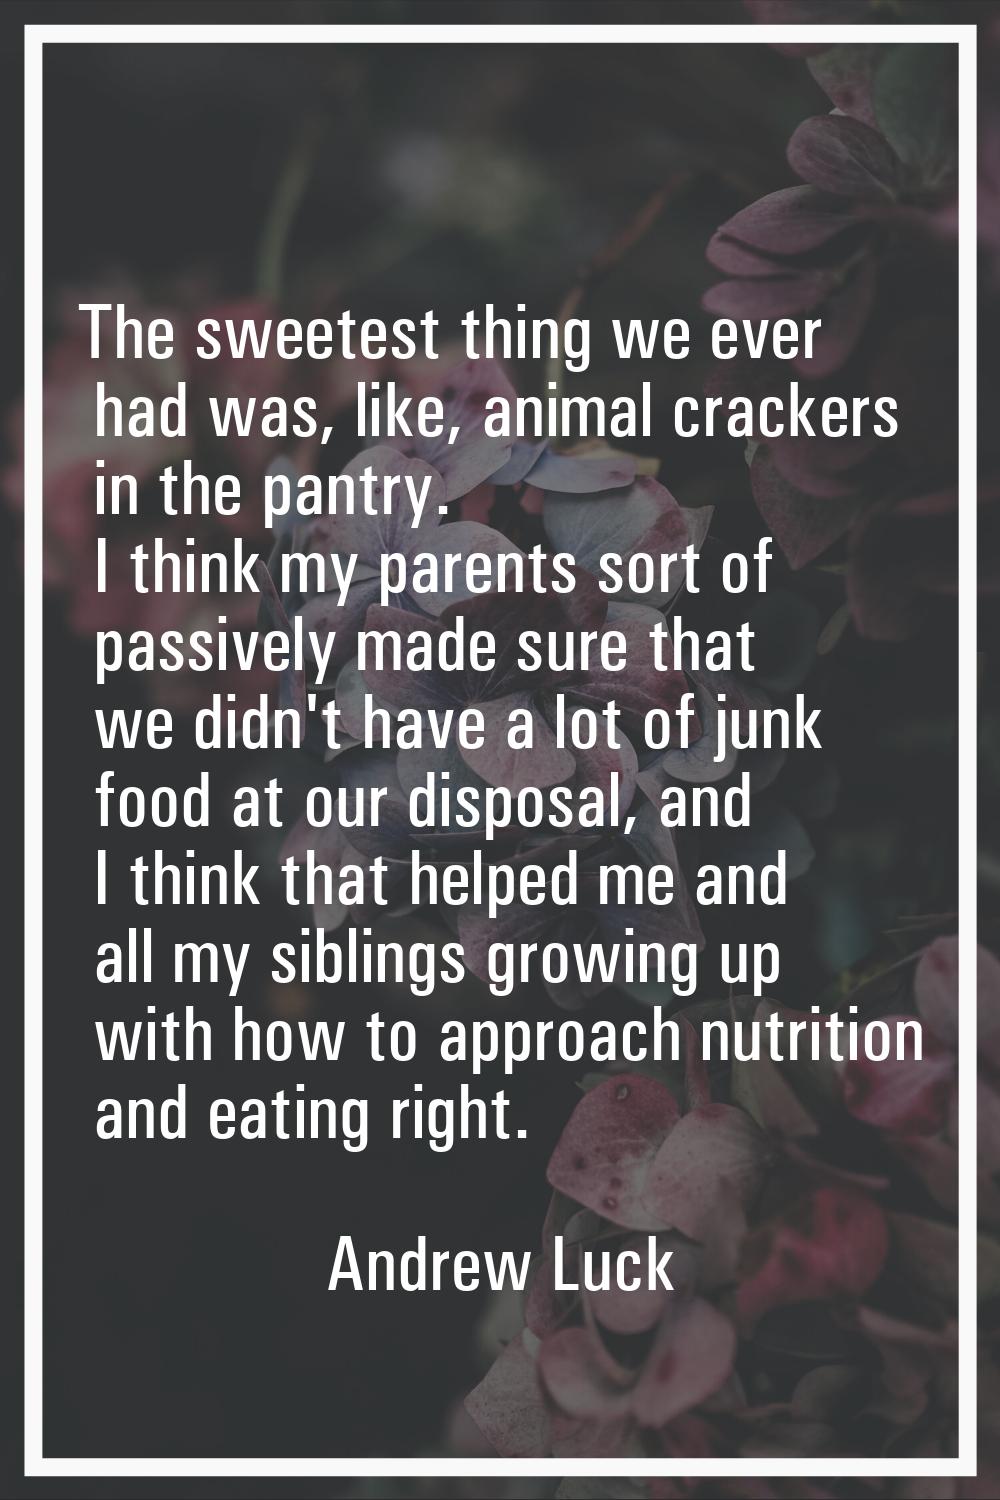 The sweetest thing we ever had was, like, animal crackers in the pantry. I think my parents sort of